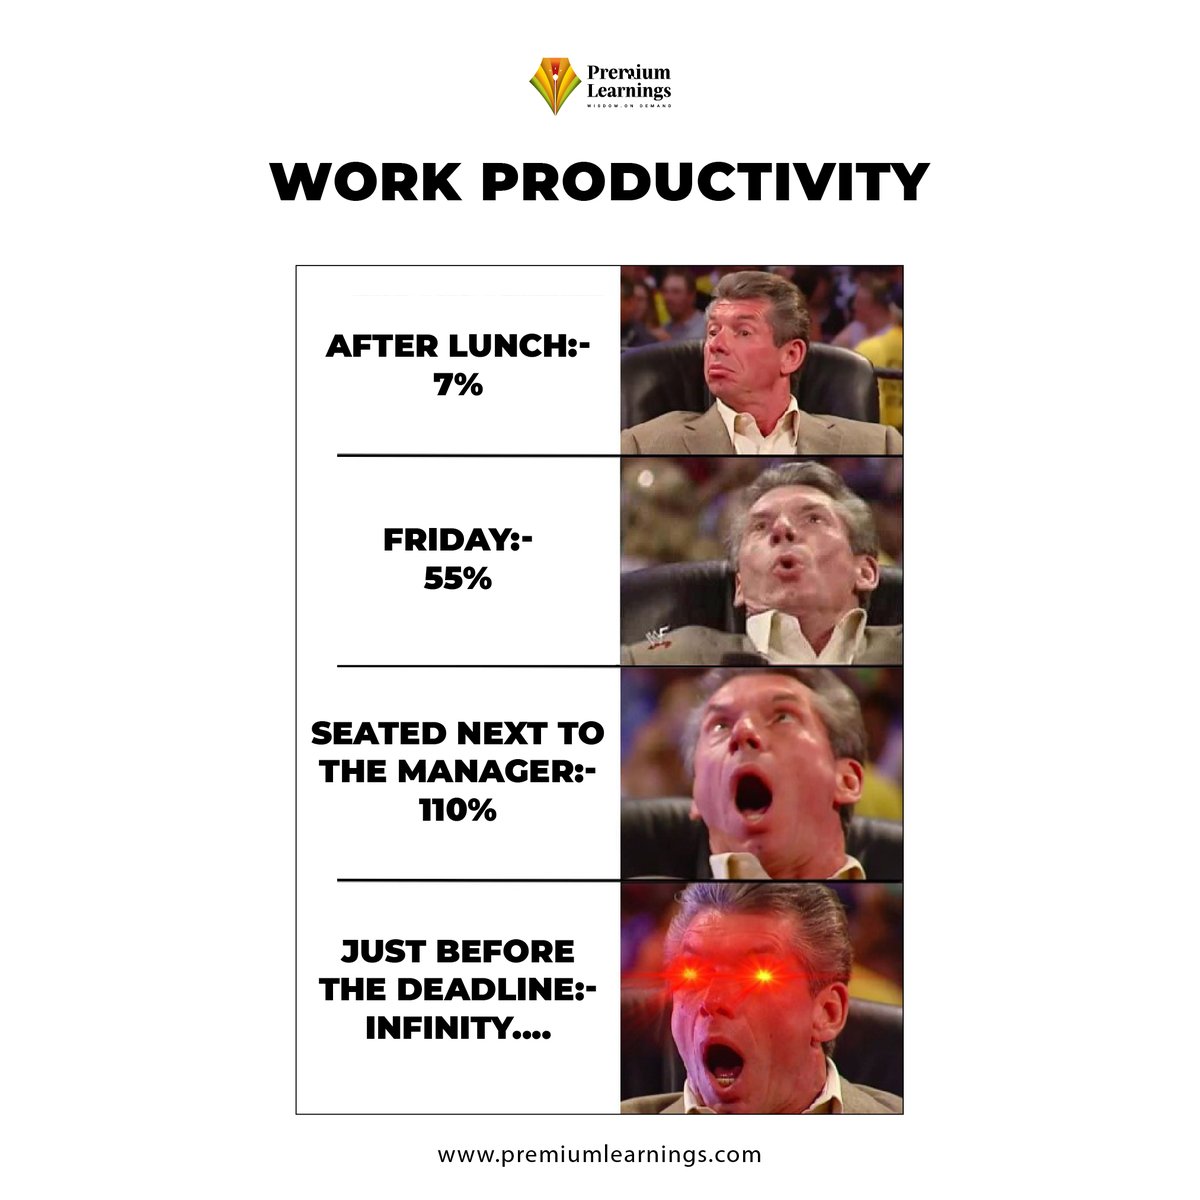 Work Productivity Levels: The Rollercoaster of Office Life

#WorkProductivity #FridayVibes #ManagerGoals #DeadlineMode #ProductivityJourney #Trending #PremiumLearnings